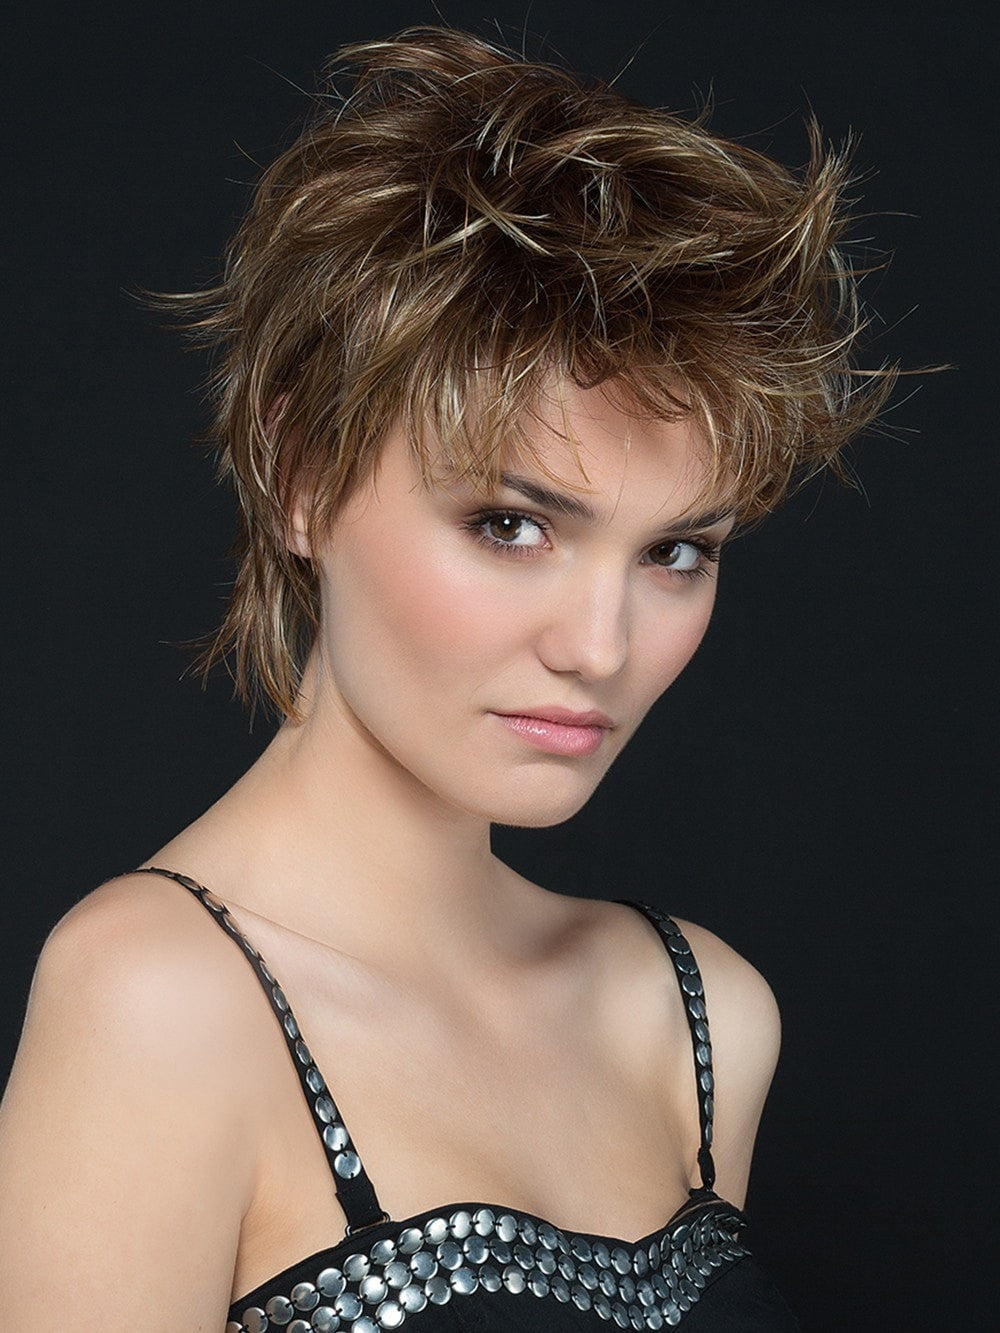 Short textured hair style with layers